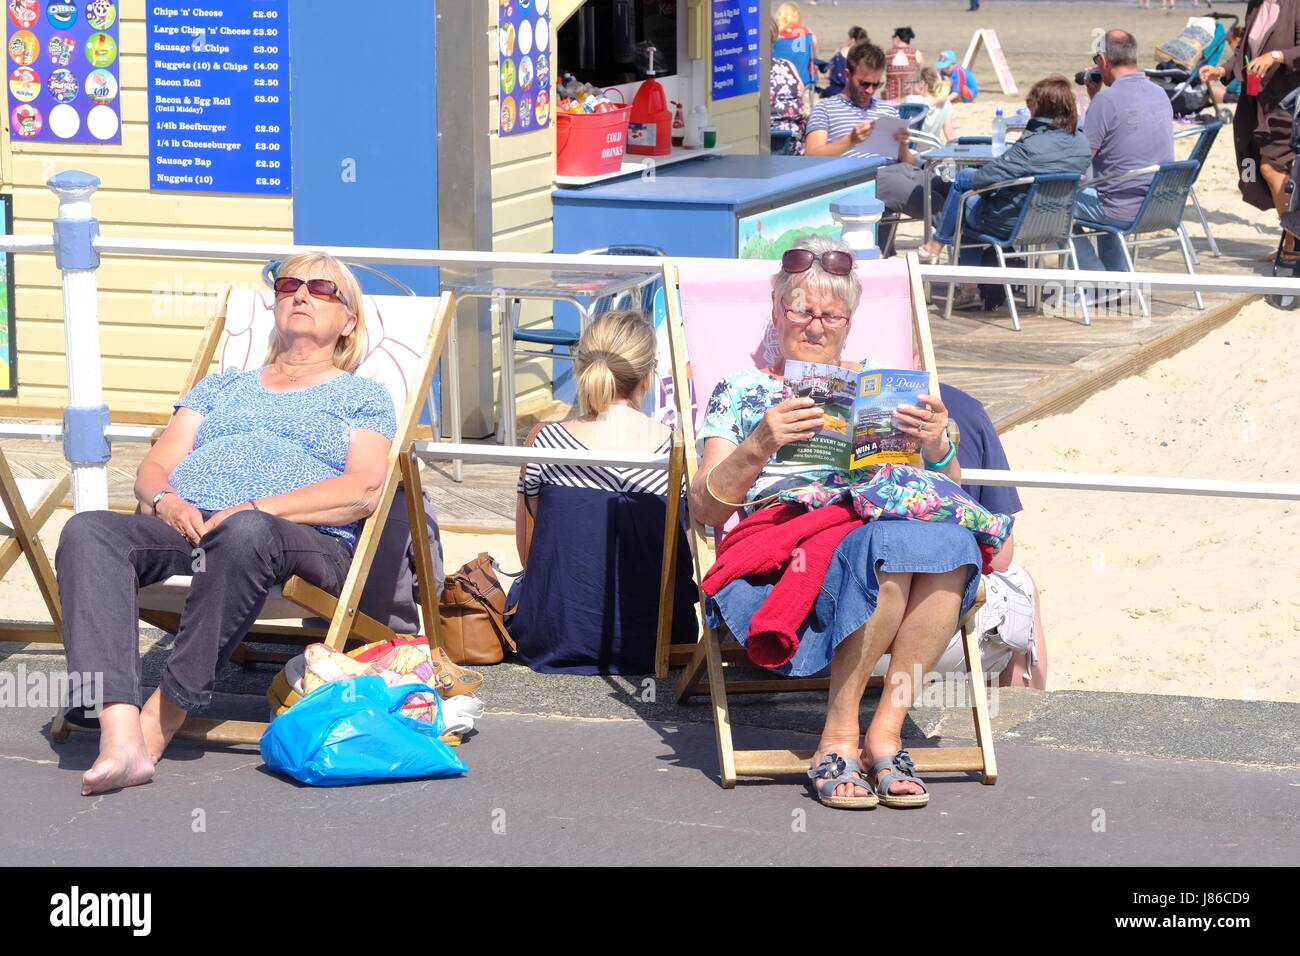 Weymouth, Dorset, UK. 27 March 2017.  Two women sit in deckchairs  on Weymouth seafront as the temperature rises during the afternoon on the Dorset coast. Credit: Tom Corban/Alamy Live News Stock Photo